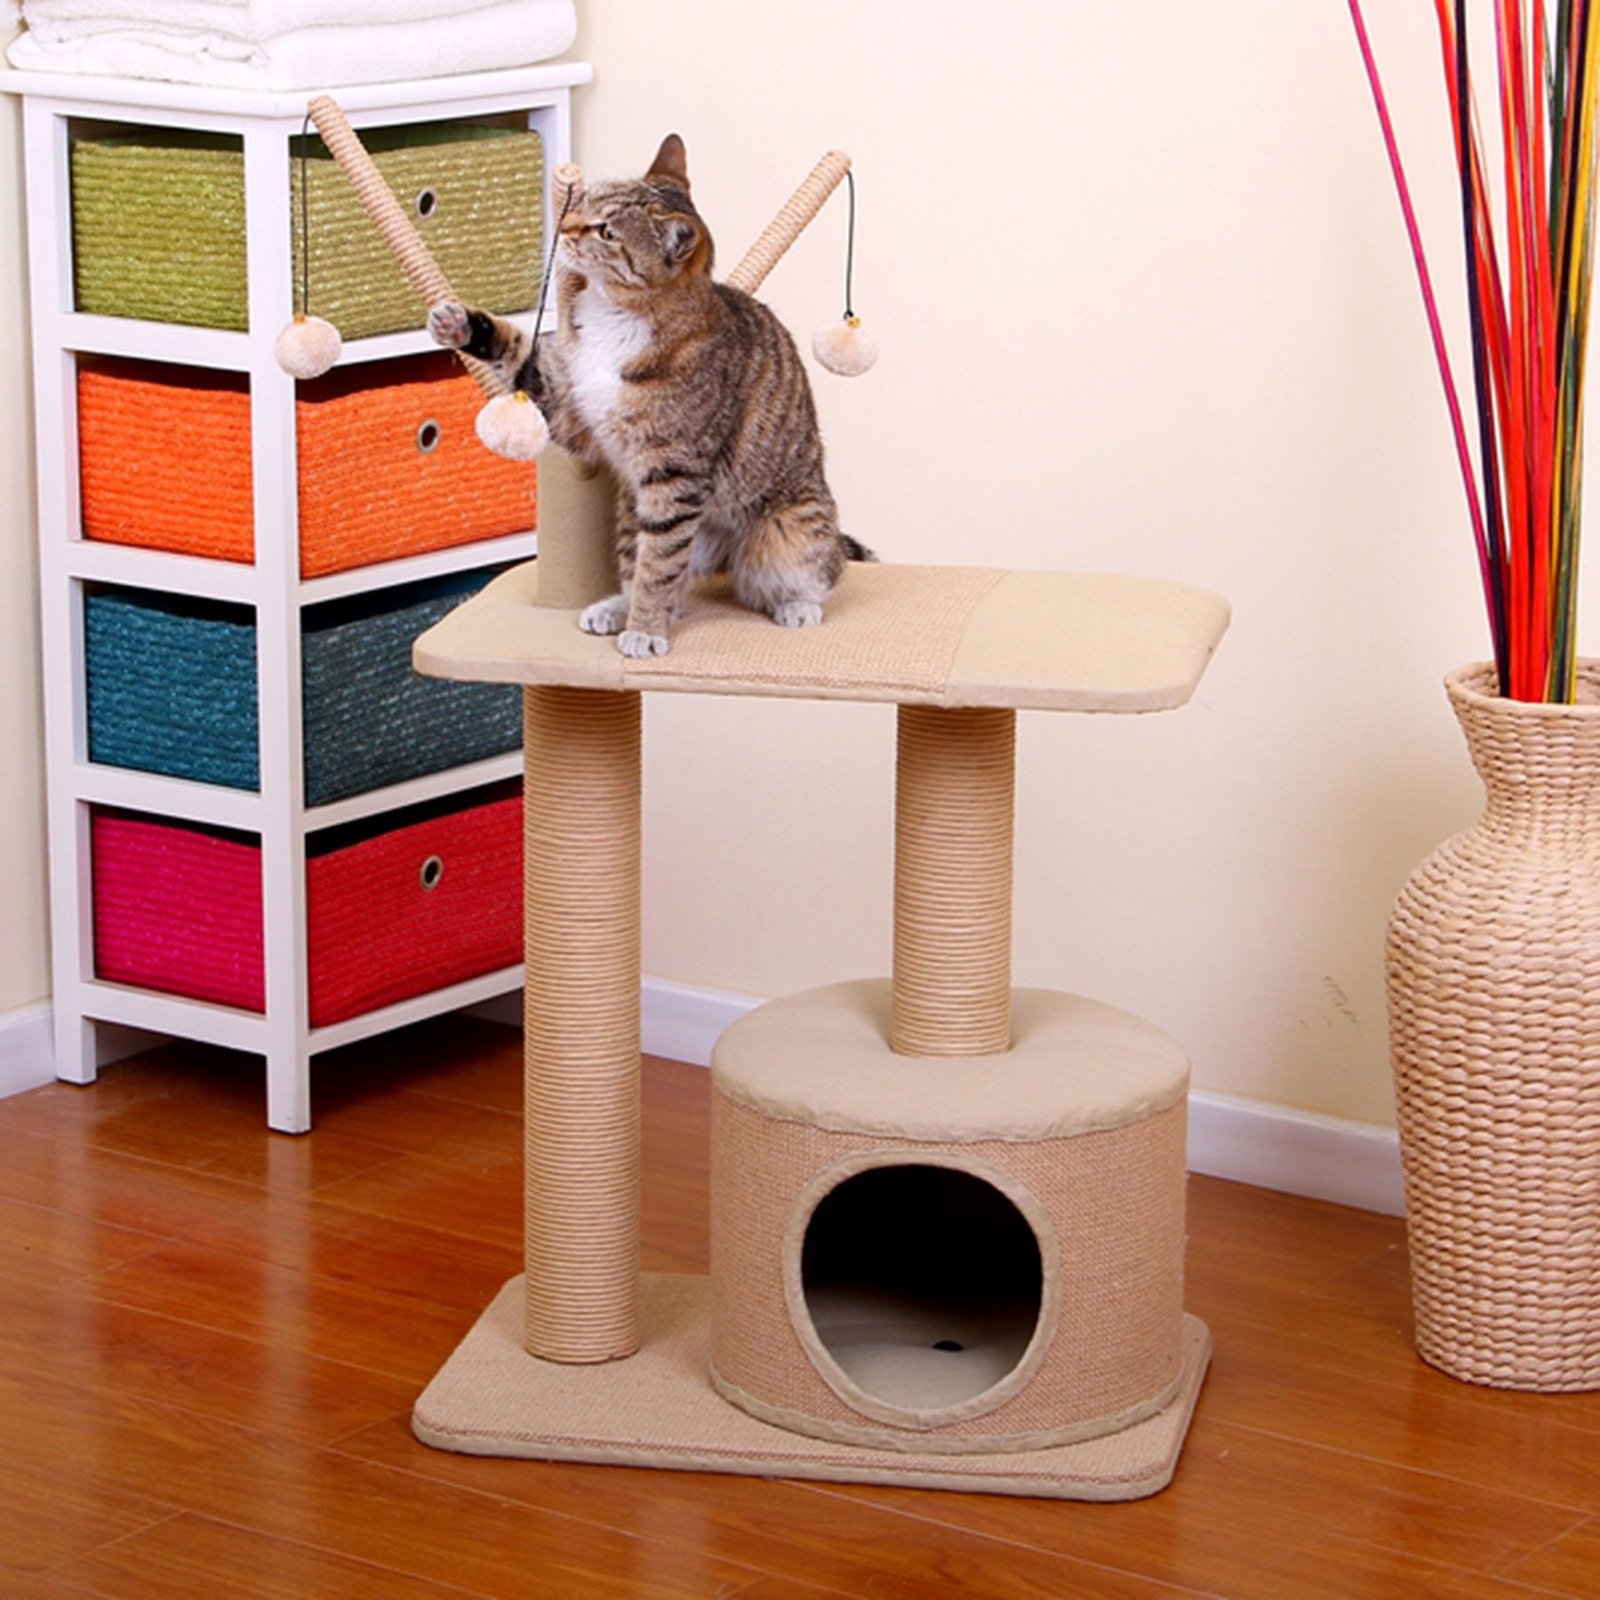 Features to Consider in a Cat Tree for Senior Cats